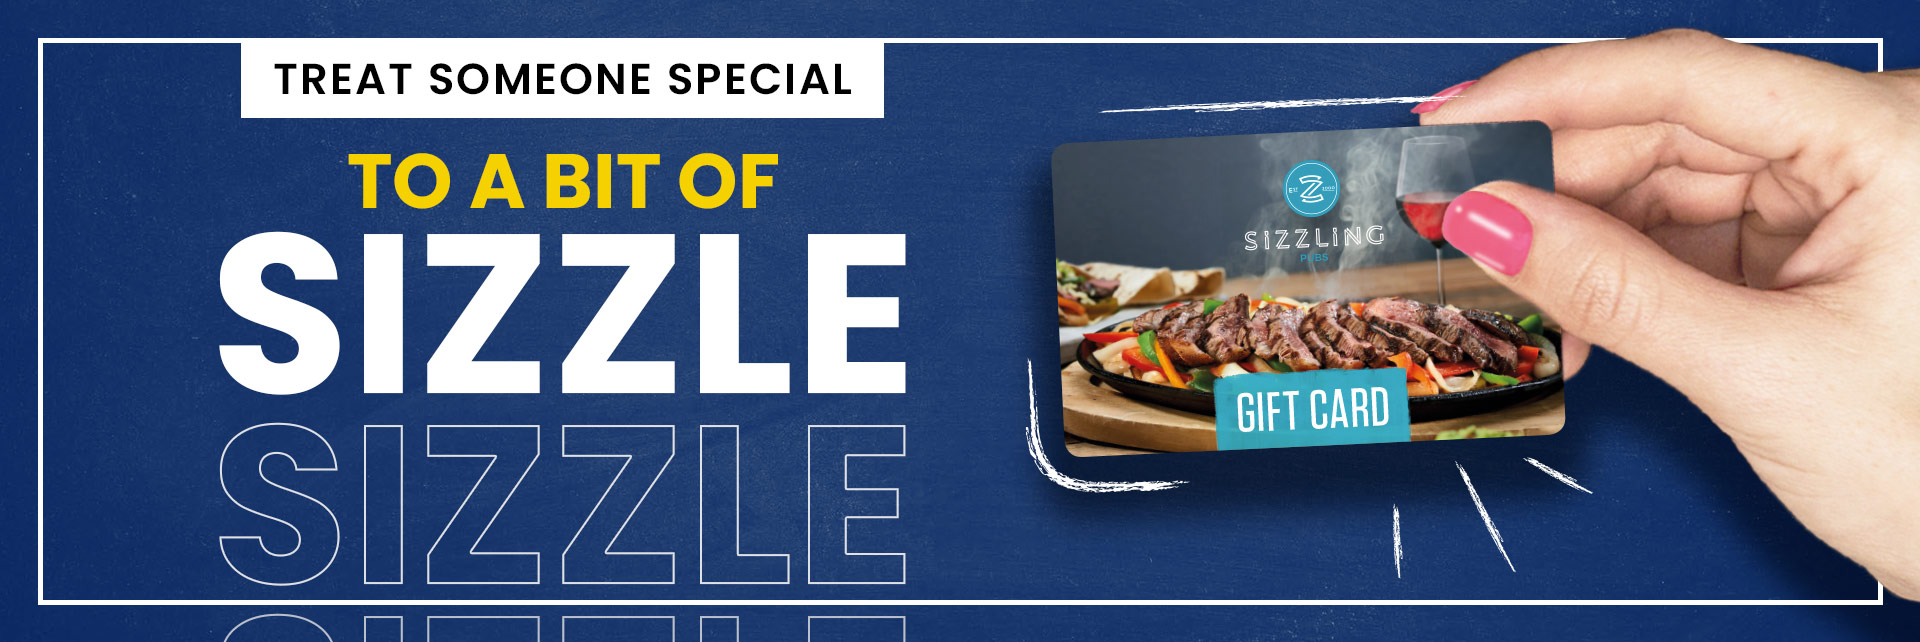 Sizzling Pubs Gift Card at The Windmill in Glasgow